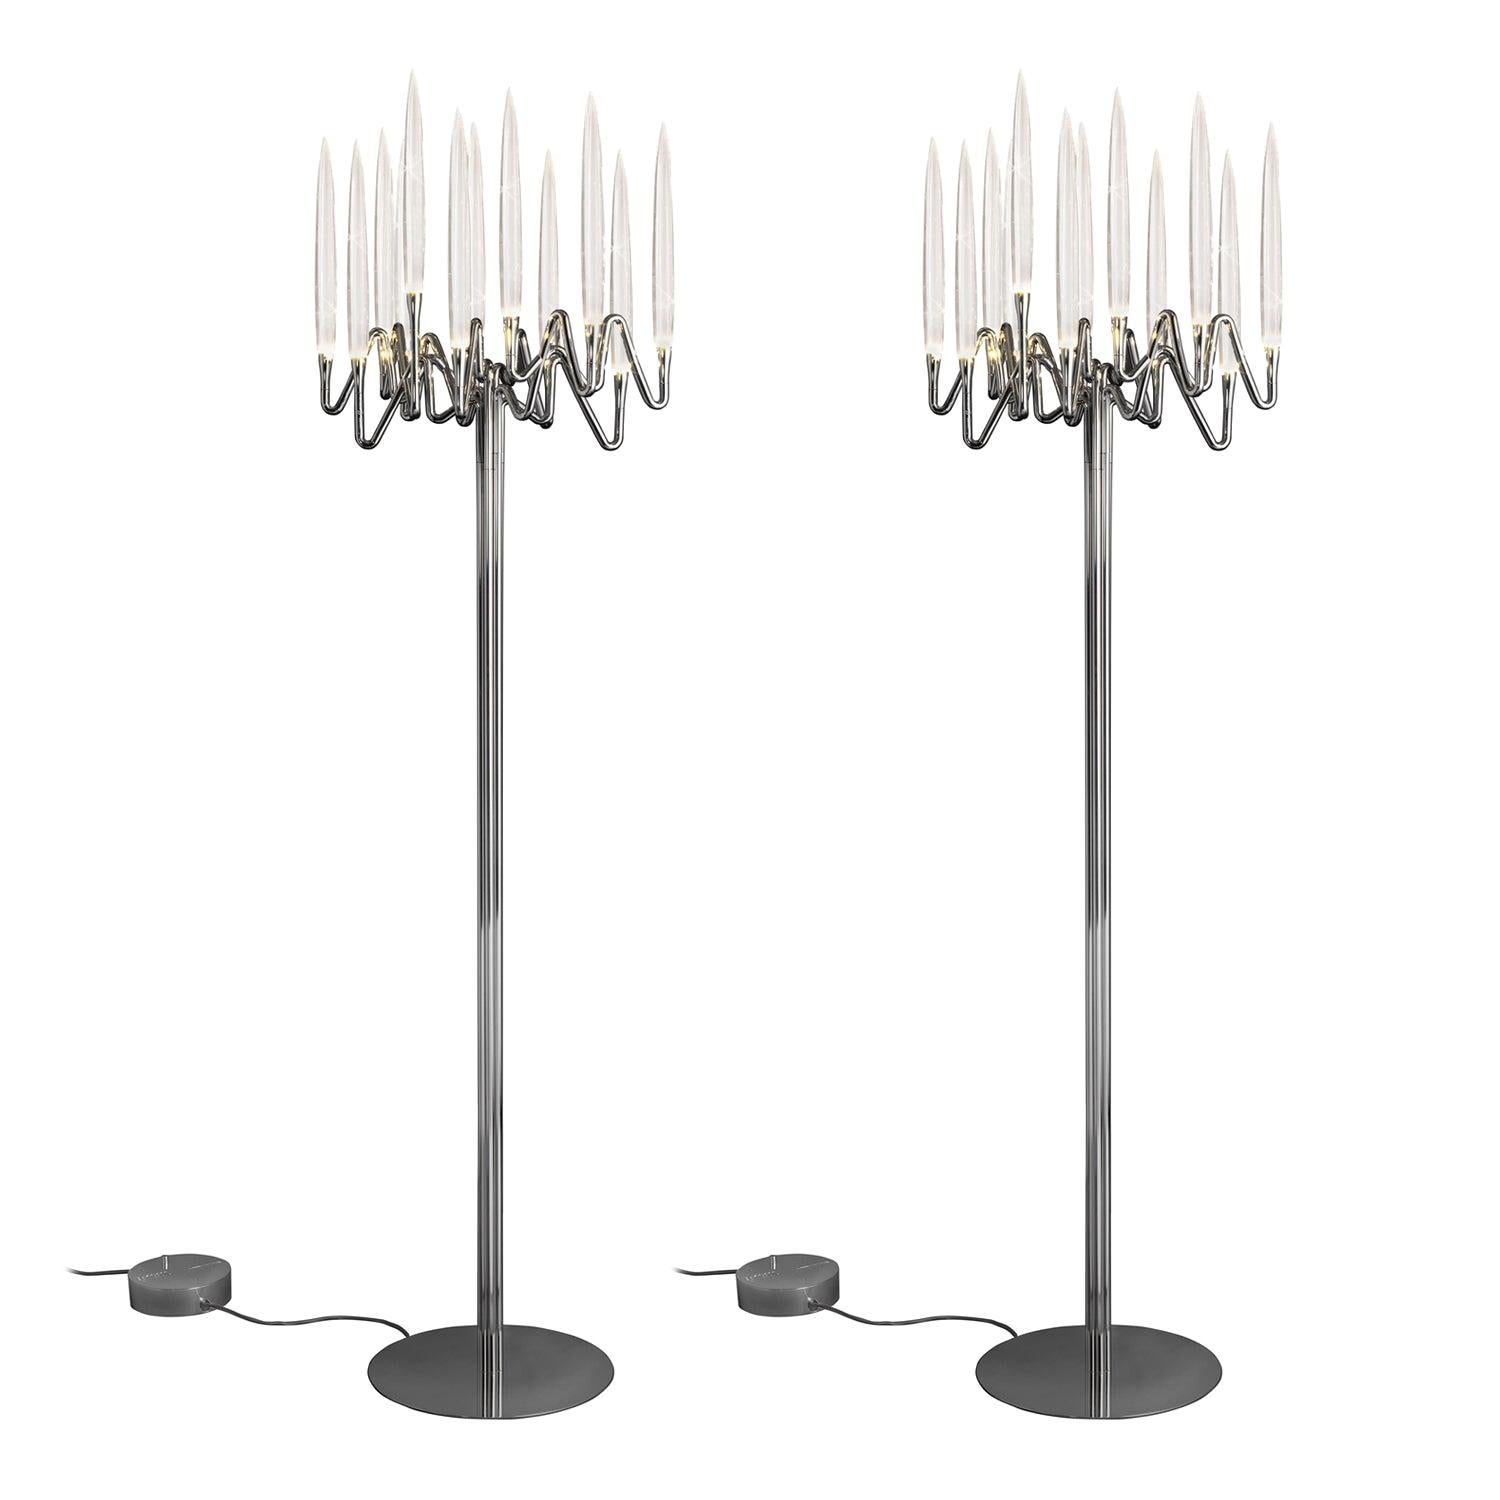 In Stock in Los Angeles, Set of 2 Floor Lamps with Nickel Finish, Made in Italy